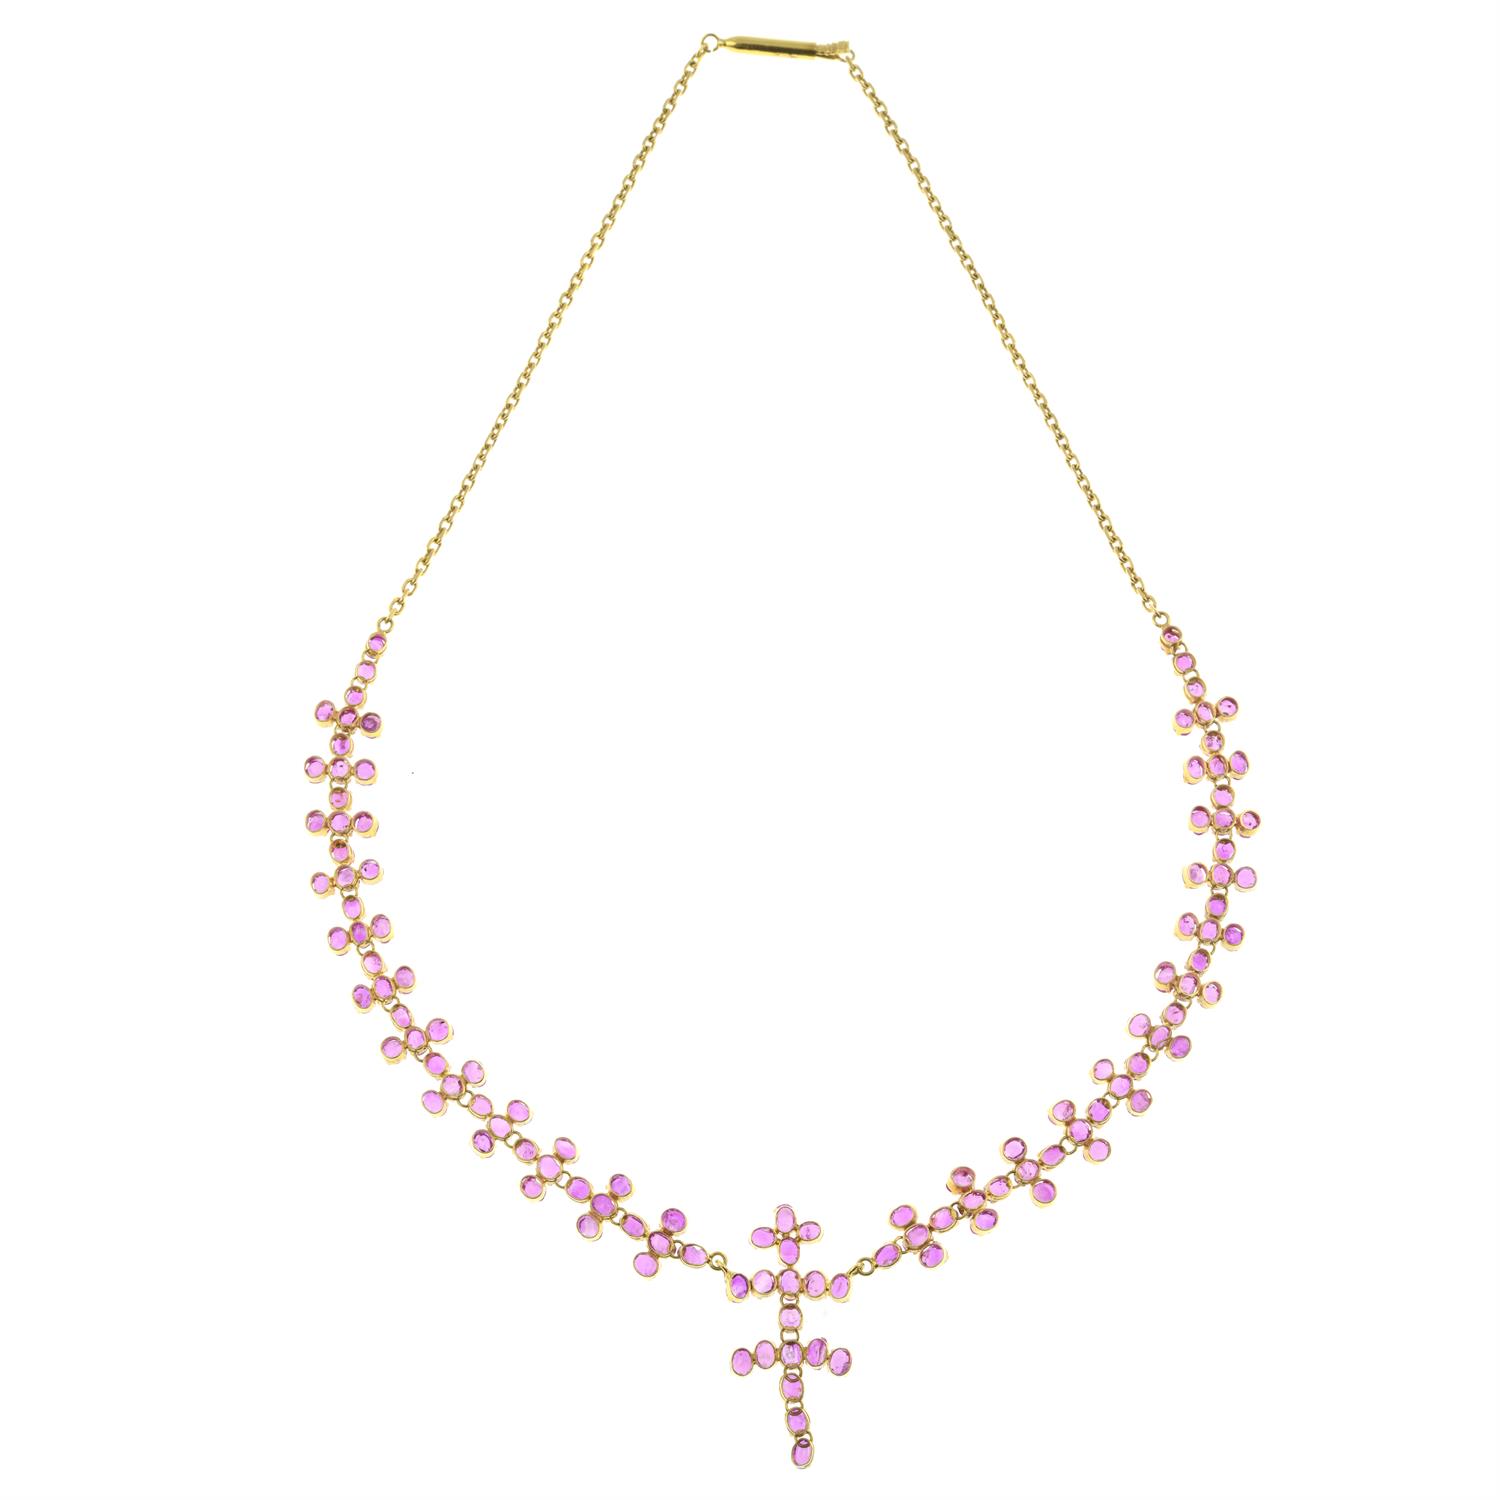 Pink sapphire necklace - Image 5 of 6